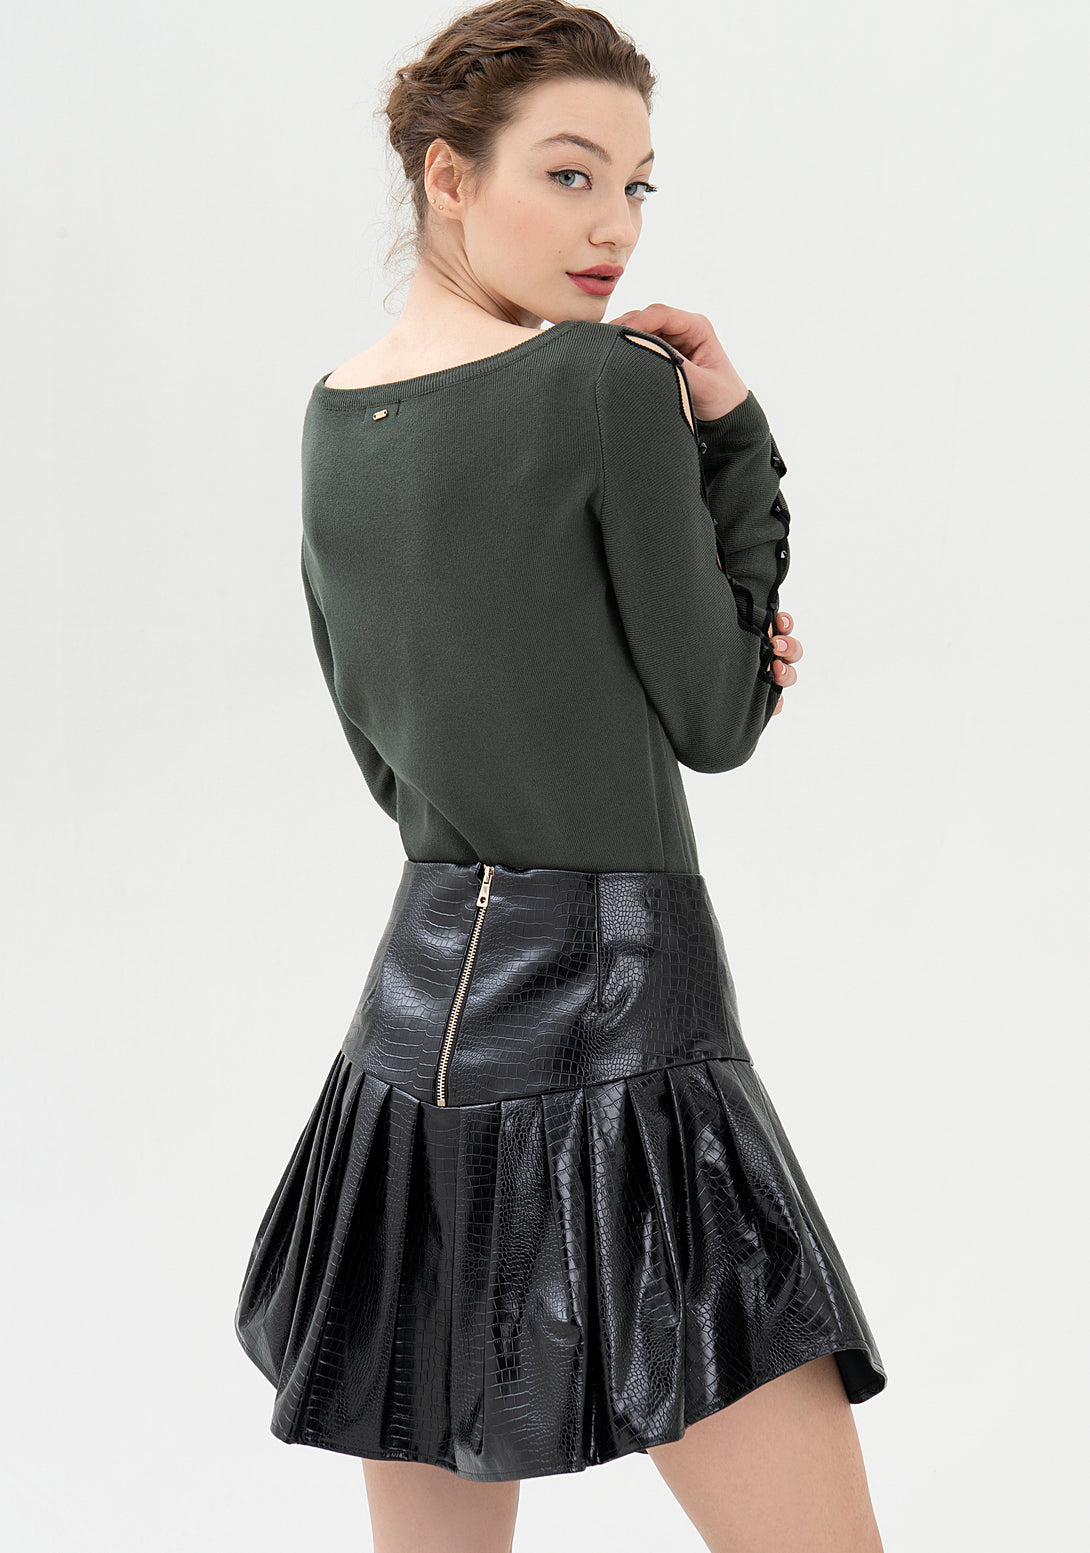 Mini skirt wide fit made in eco leather with crocodile print